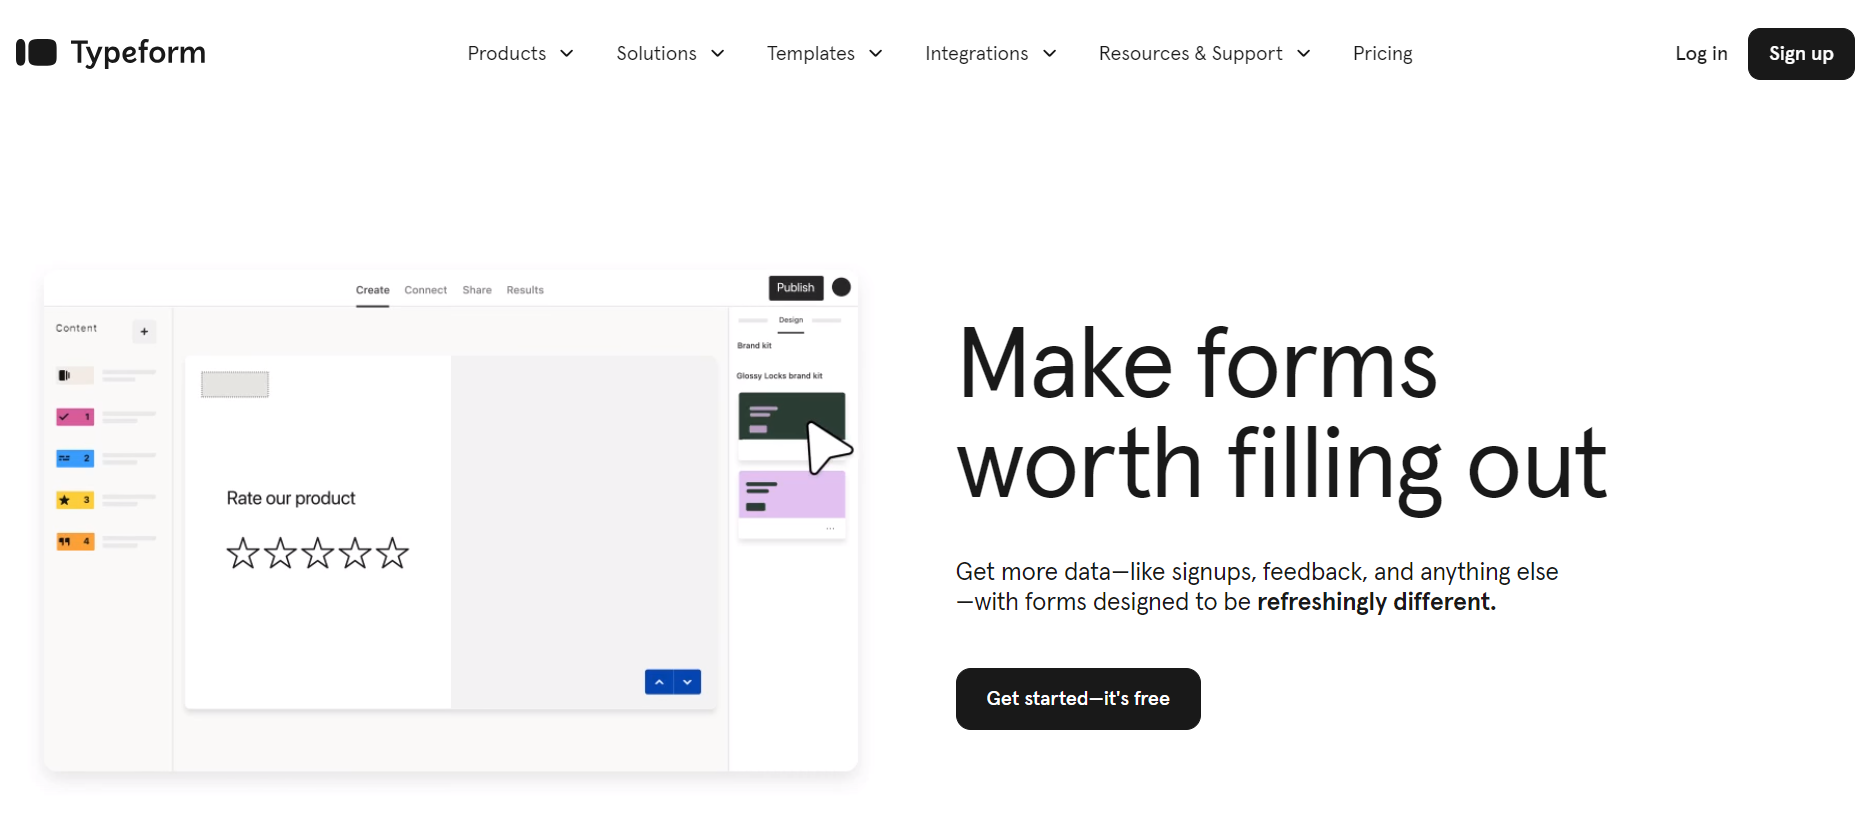 Typeform for Data Entry Software